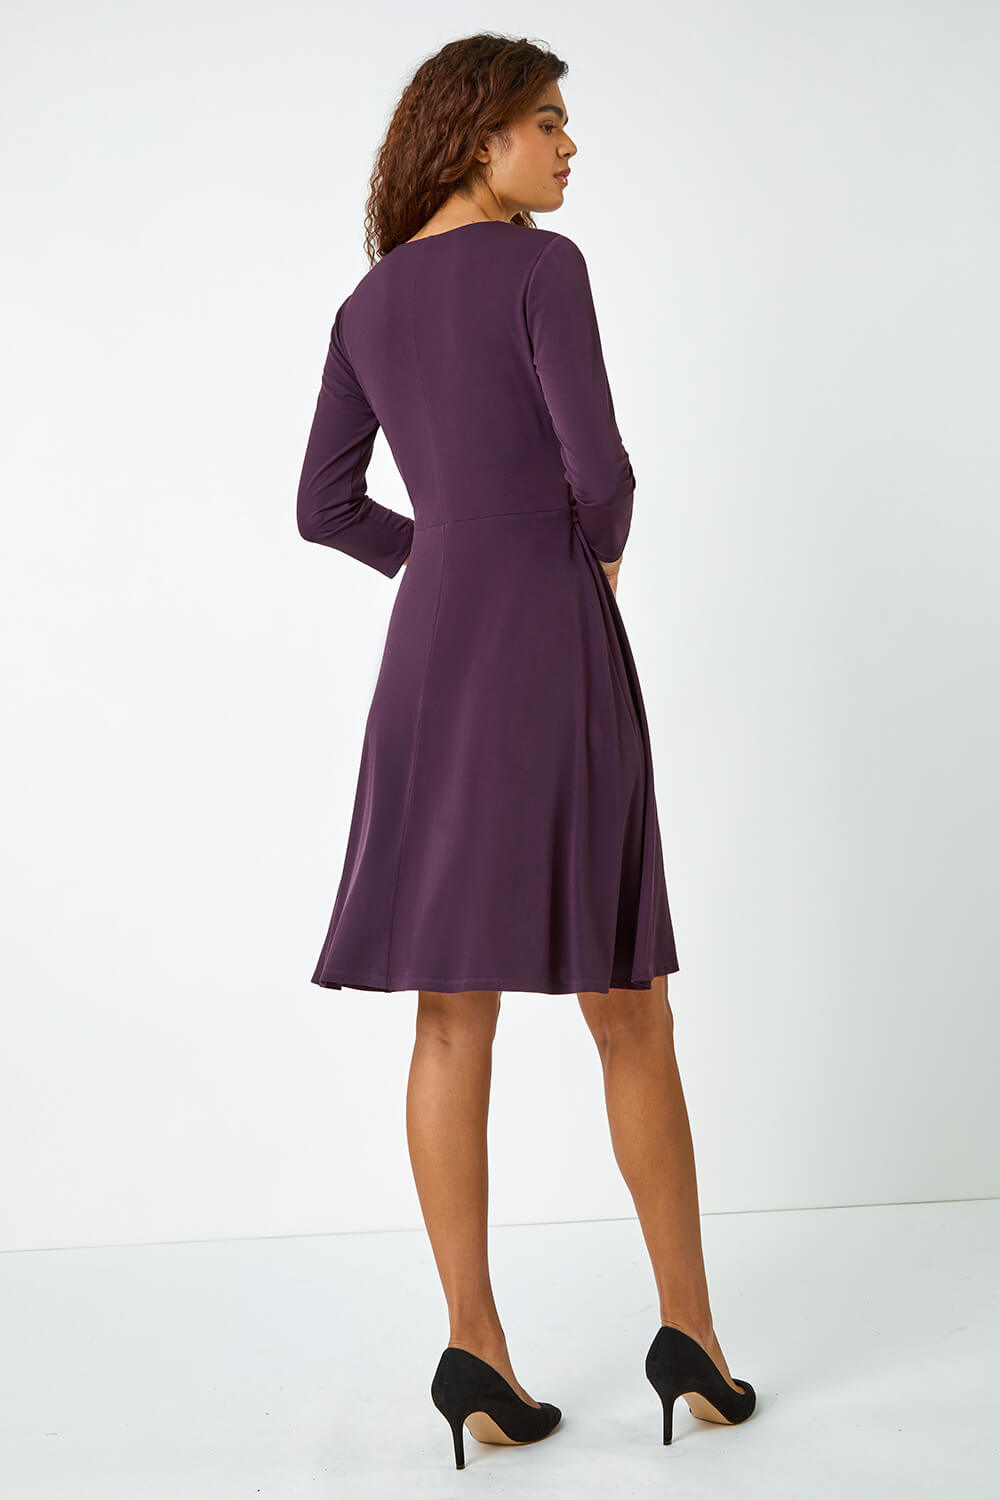 Aubergine Ring Buckle Wrap Stretch Dress, Image 3 of 5